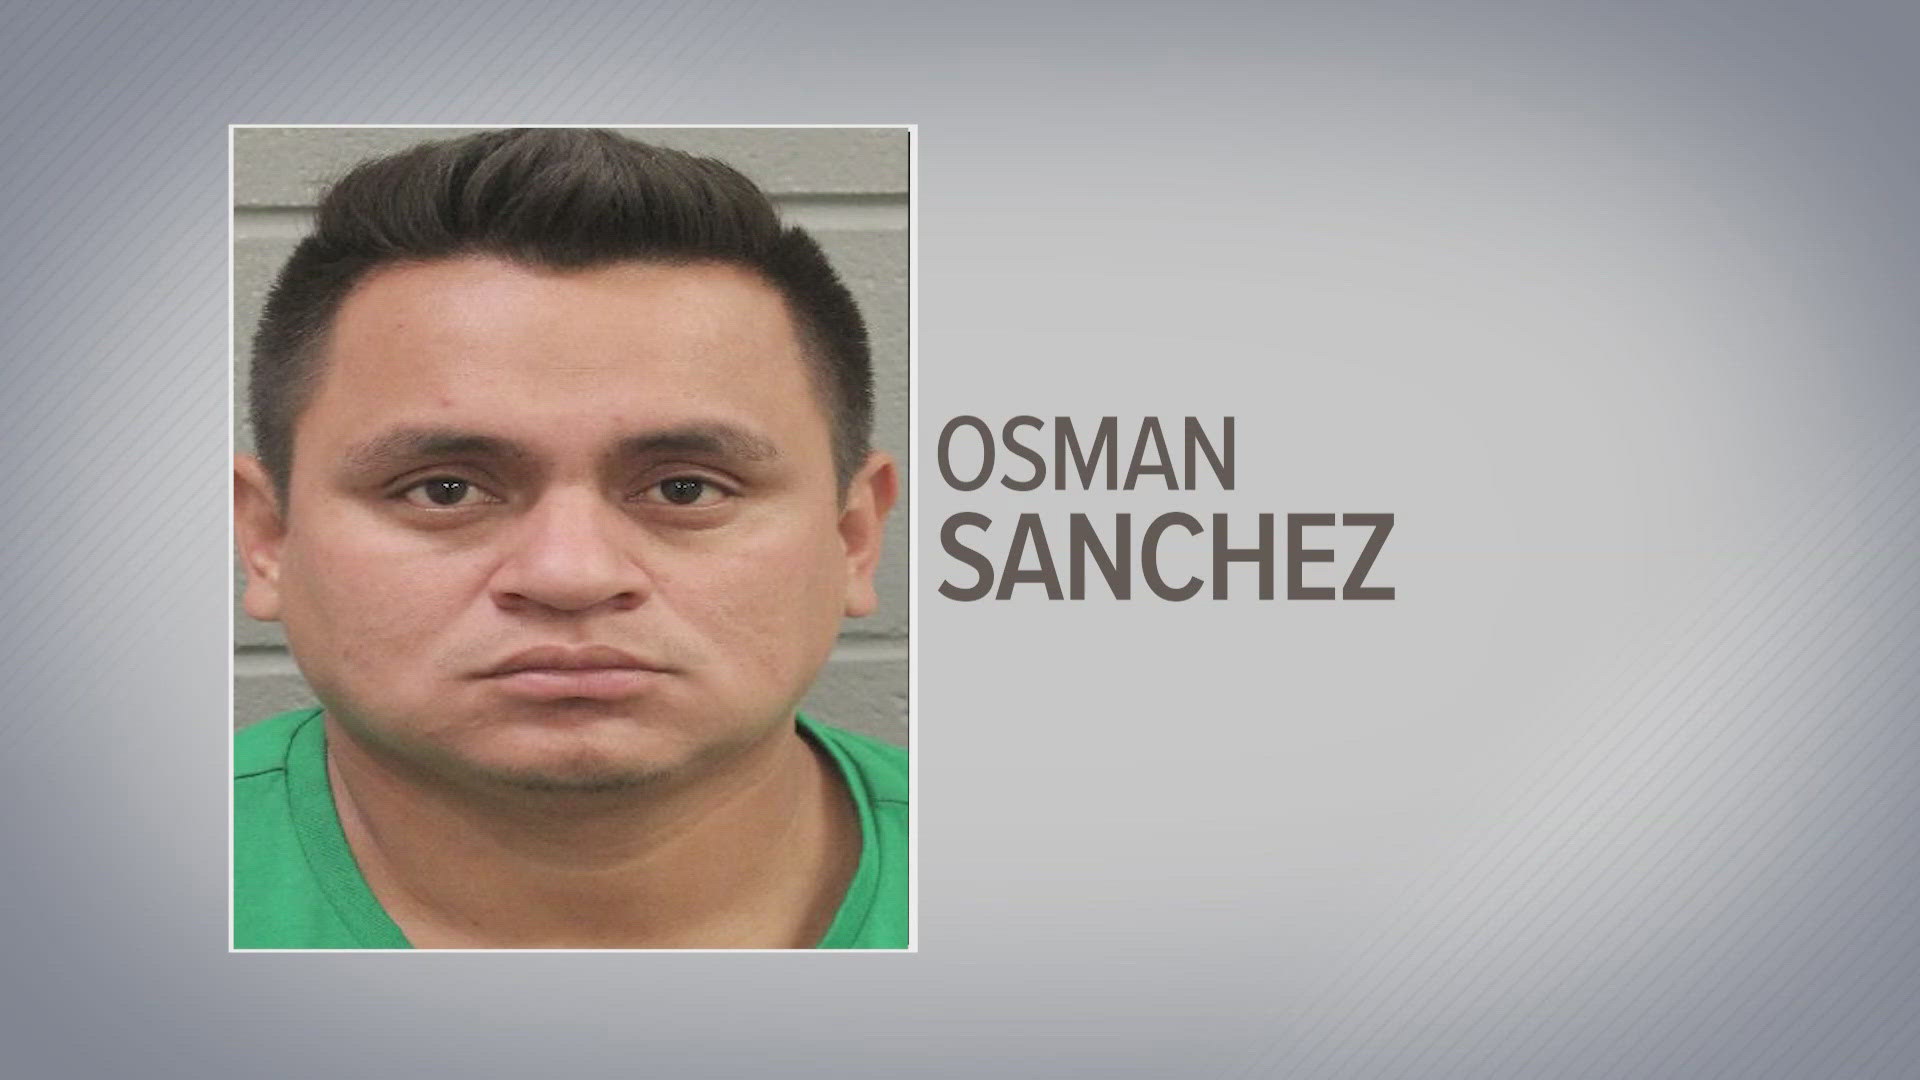 According to court documents, Osman Estanly Solorzano Sanchez, 32, is charged with murder in the road rage shooting death of Ricardo Vega, 27.